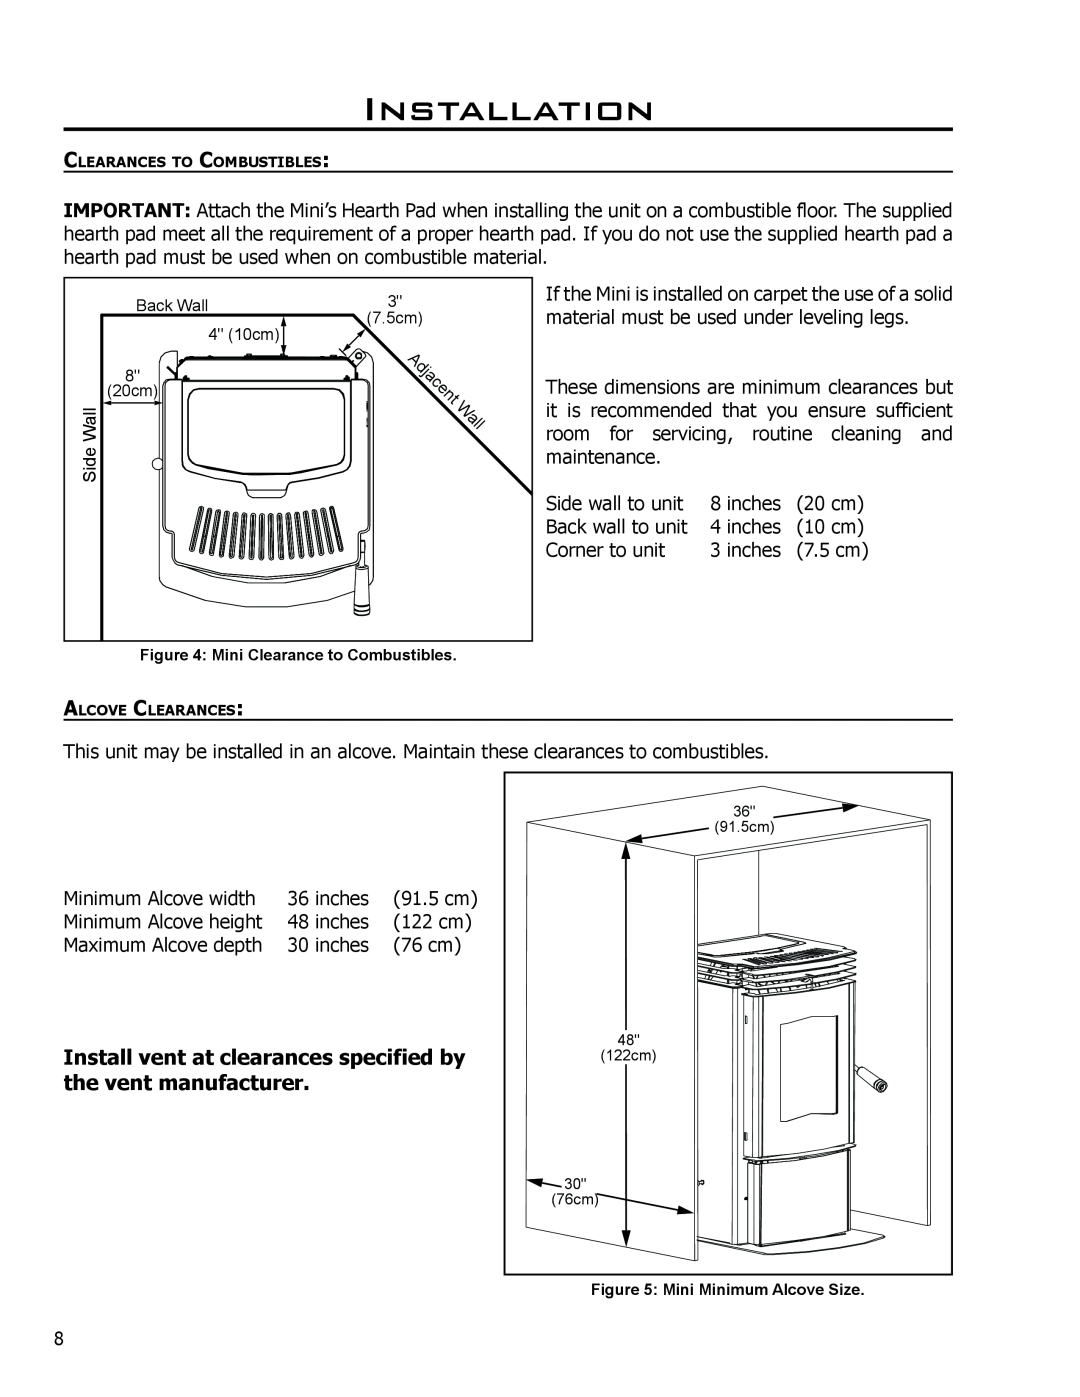 Enviro C-11150 technical manual Installation, Install vent at clearances specified by the vent manufacturer 